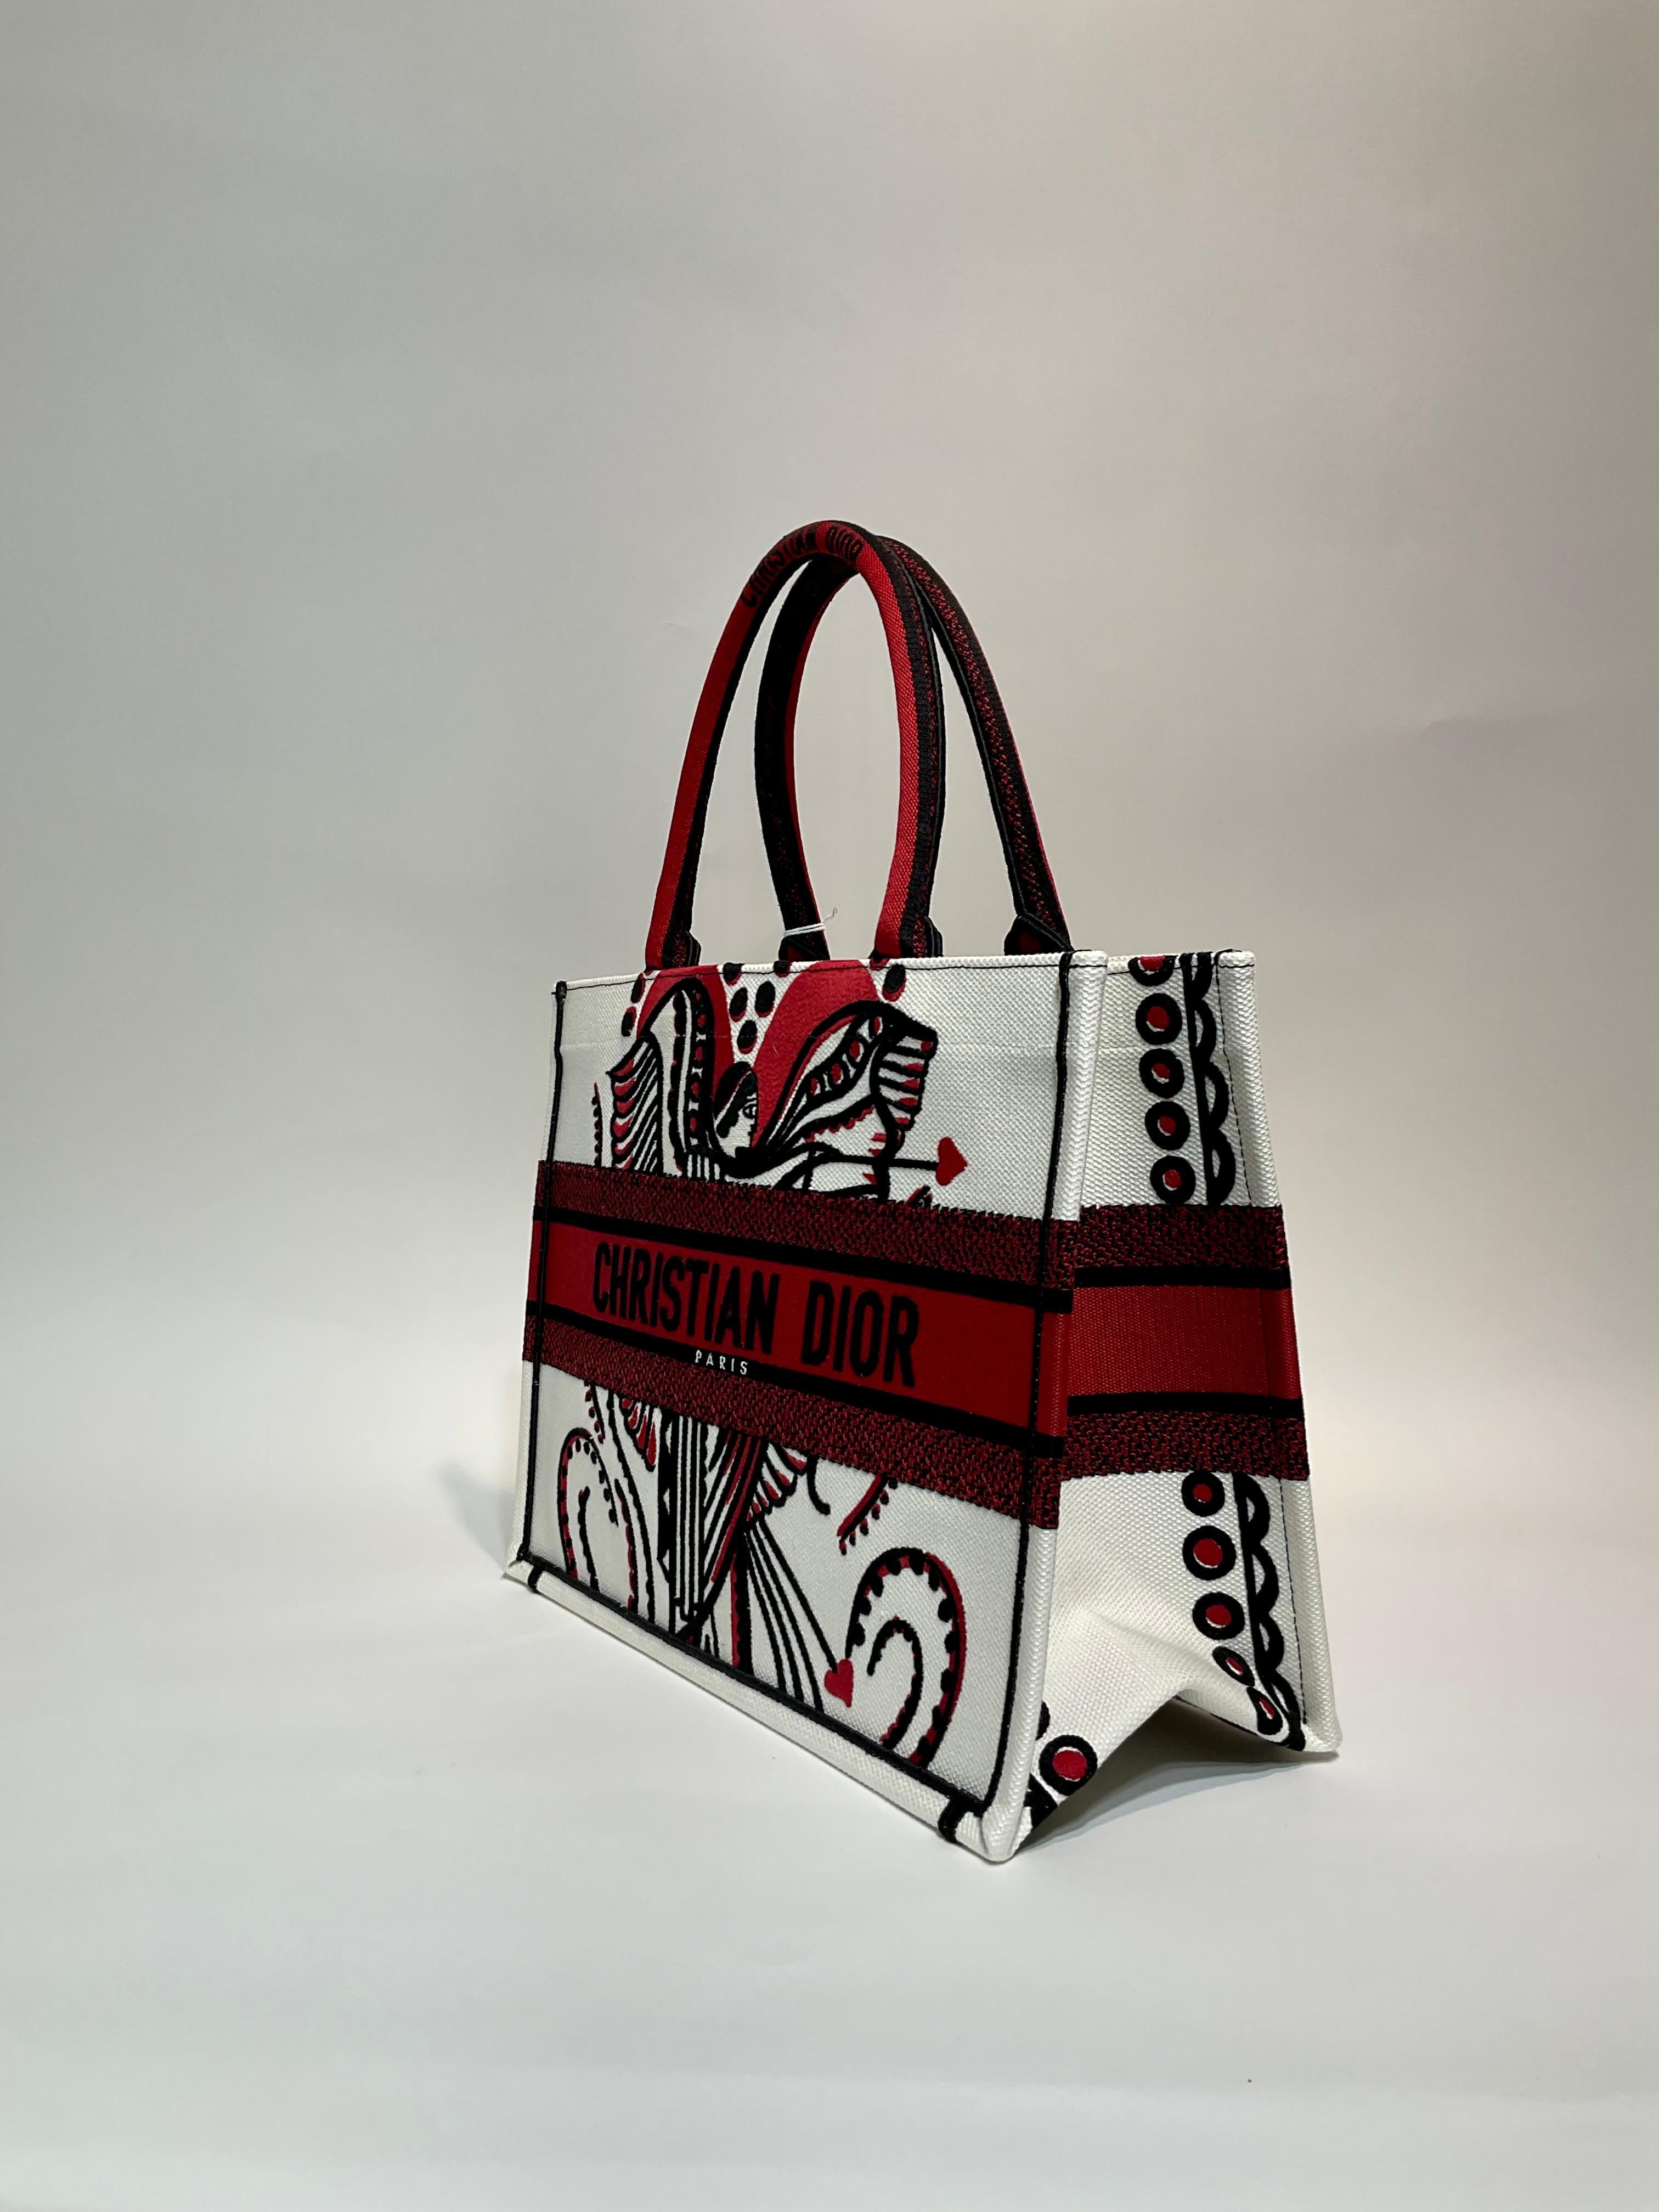 Christian Dior Embroidered Canvas Cupidon Medium Book Tote- Pristine; appears never carried.
Part of a capsule collection, this striking tote features Eros, the Greek God of Love.  Creamy winter white canvas with deep red and black accents. 